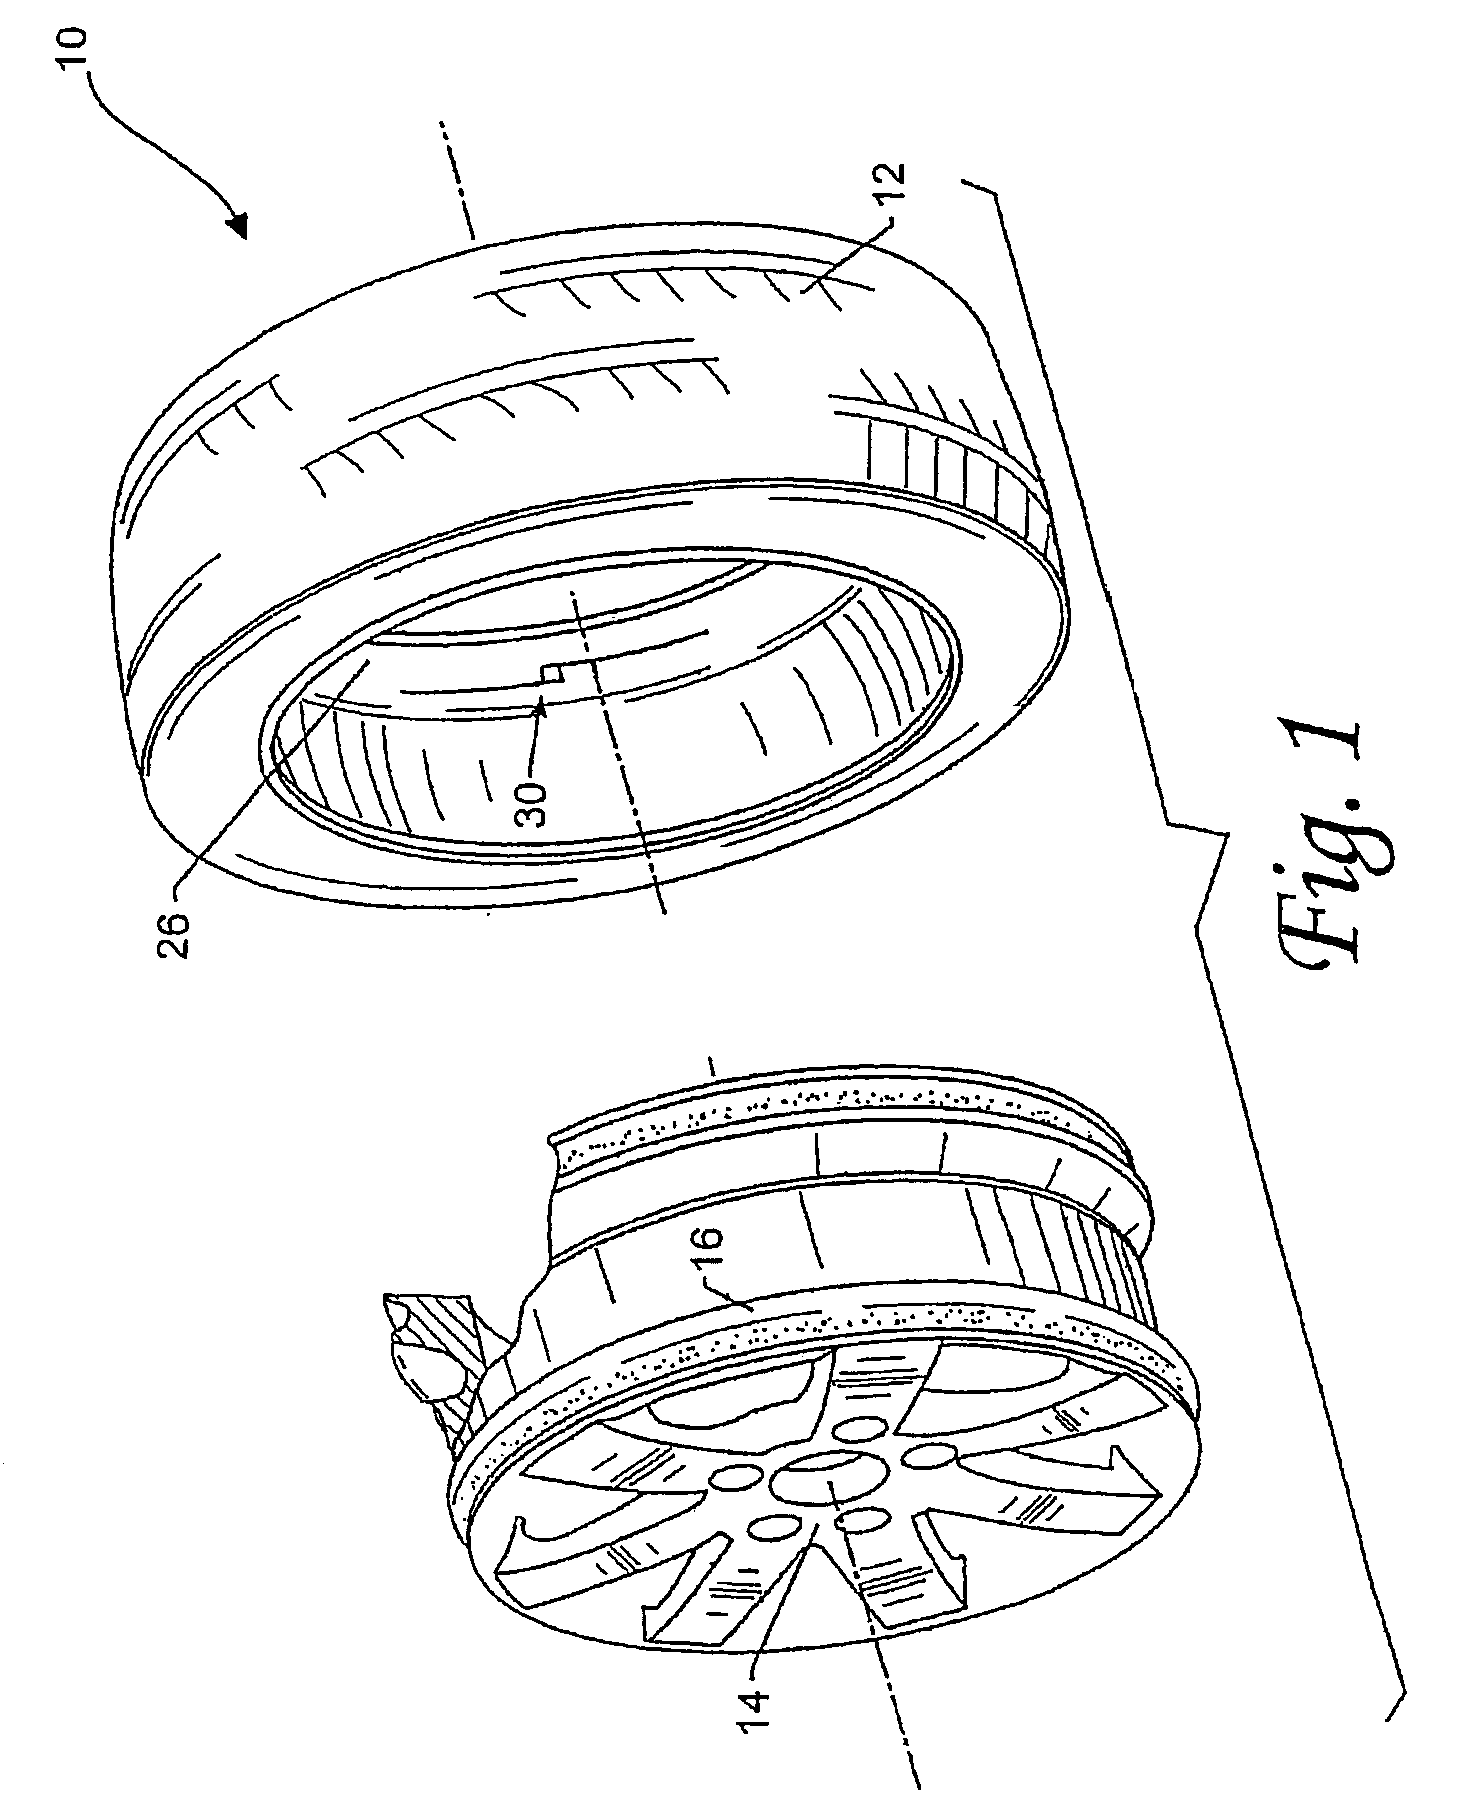 Tire electronics assembly having a multi-frequency antenna